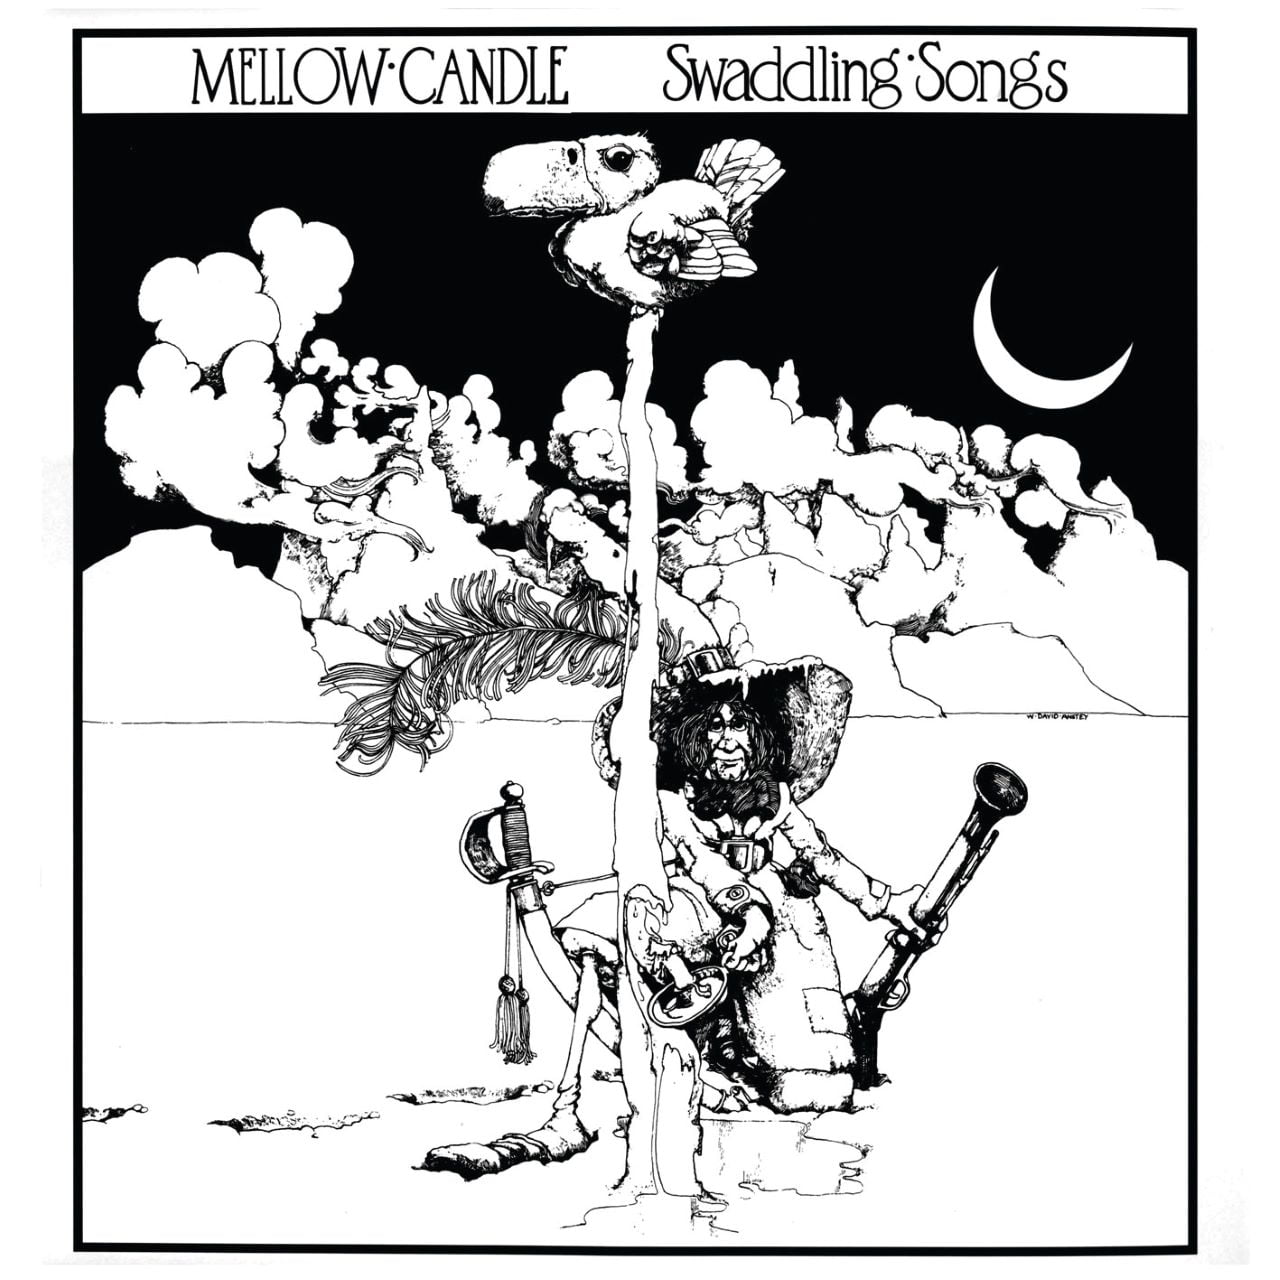 Mellow Candle – Swaddling Songs cover album